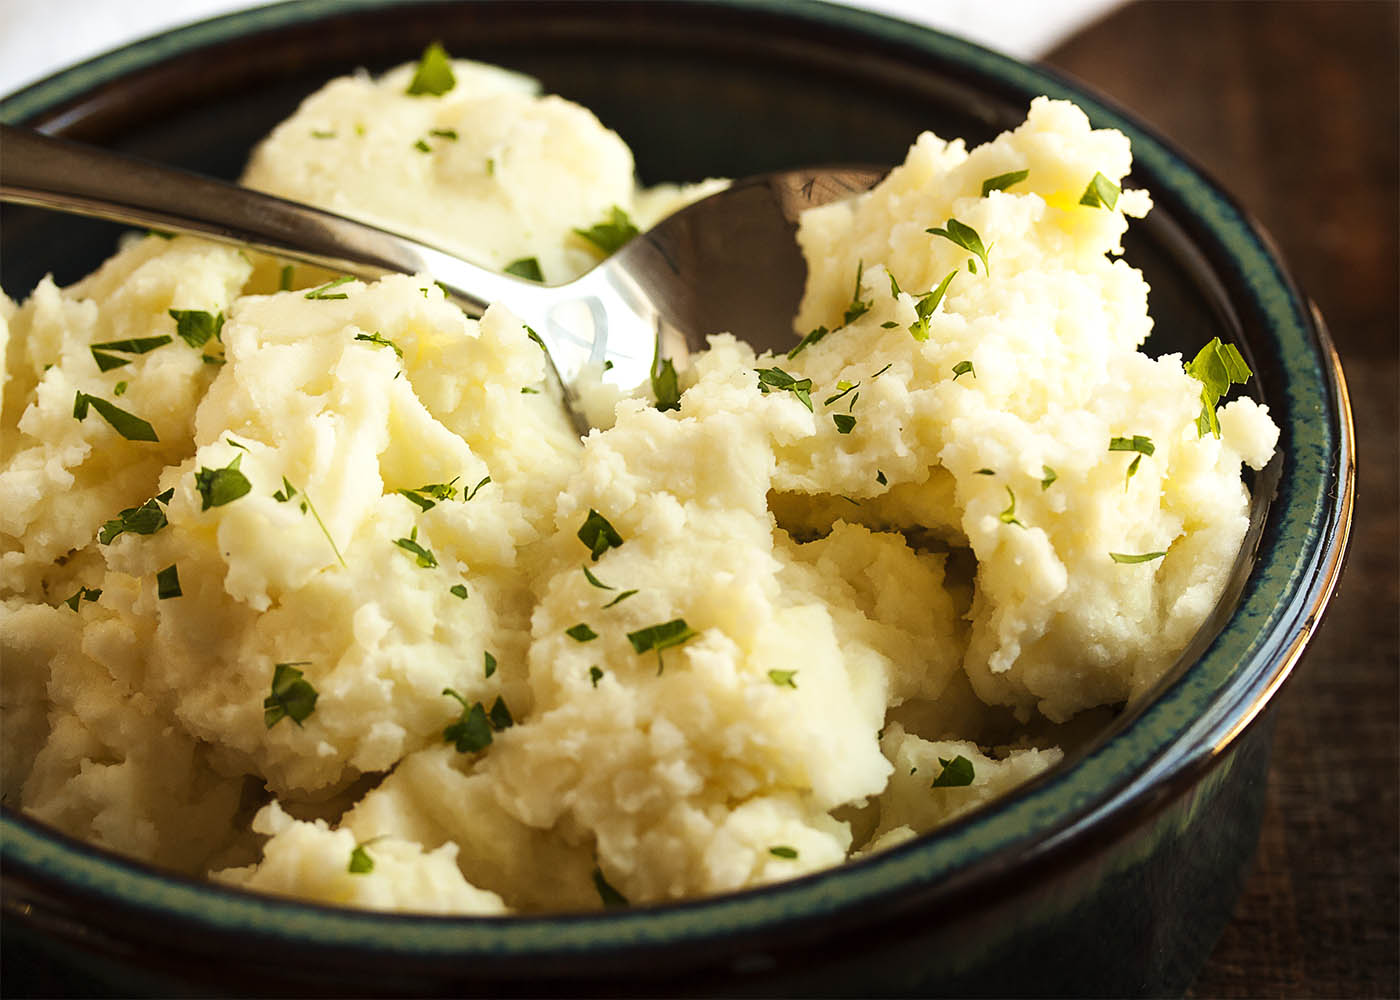 Cream Cheese Mashed Potatoes - Peeled yellow potatoes are simmered in salted water and then mashed with cream cheese and a splash of heavy cream in these amazingly tasty mashed potatoes. | justalittlebitofbacon.com